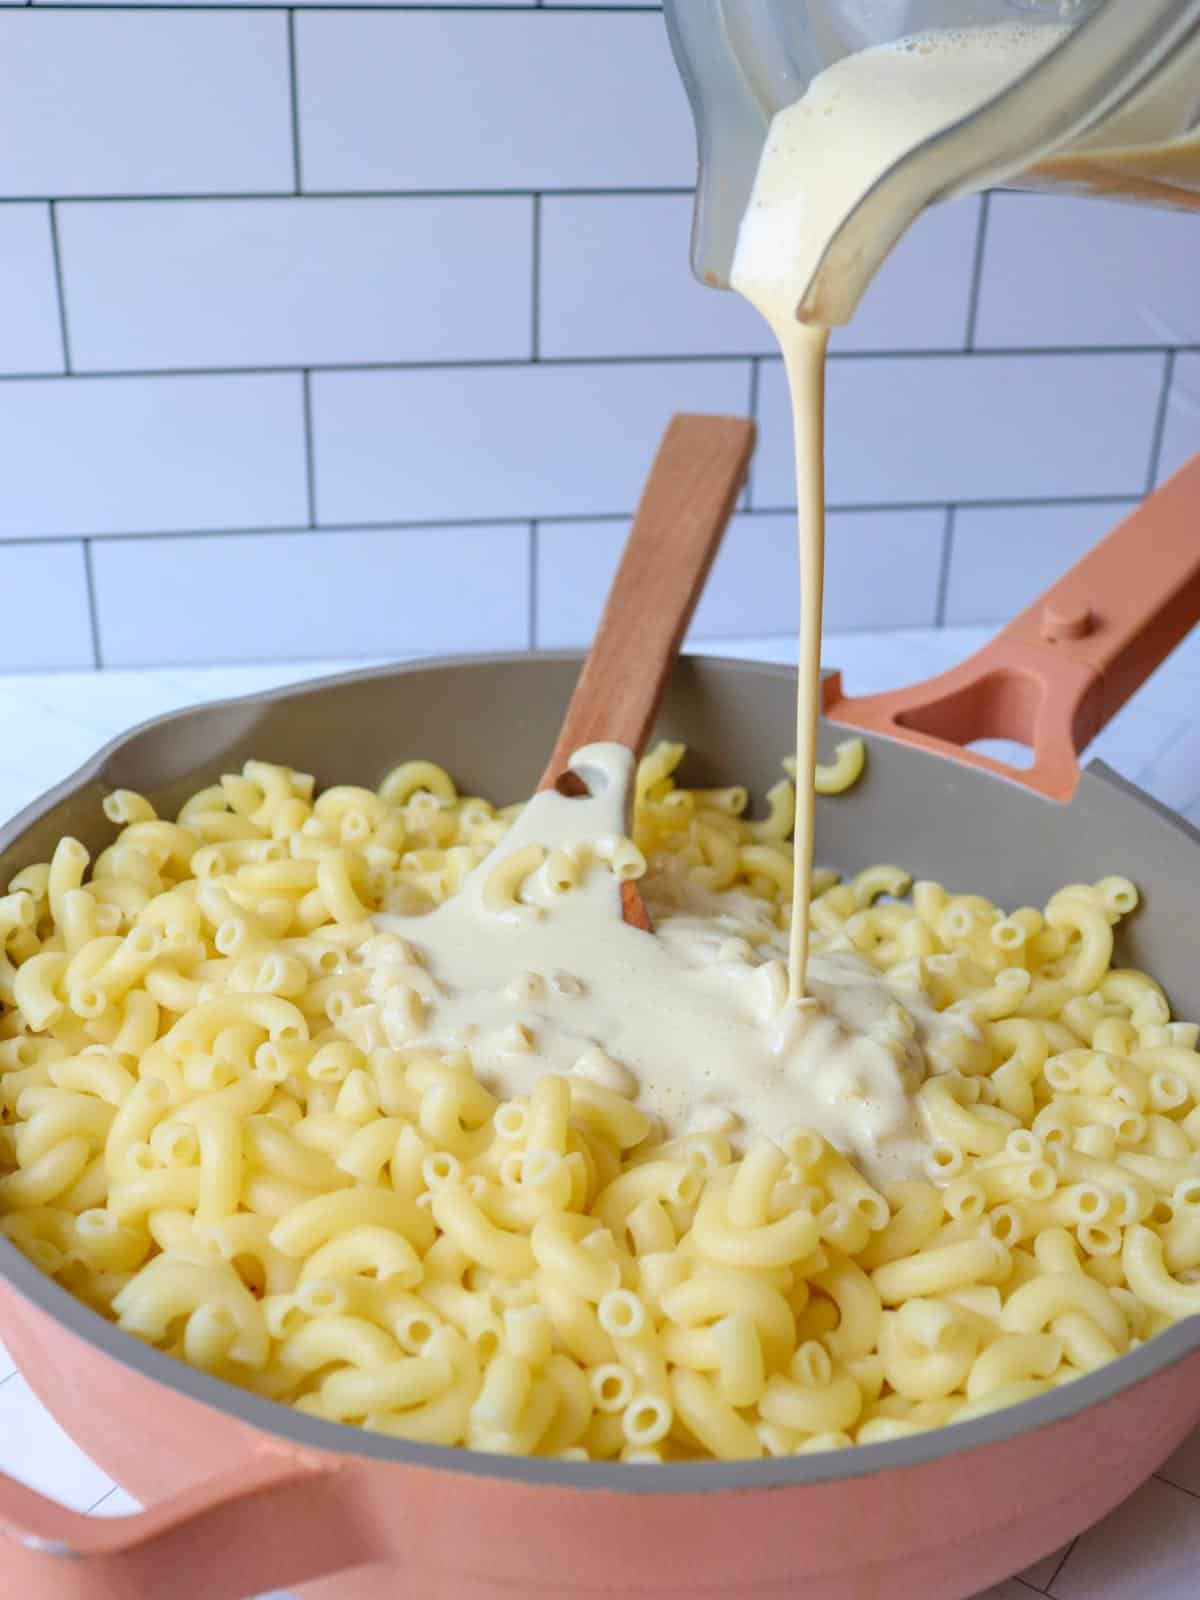 Macaroni noodles in a pan with vegan cheese sauce being poured over them.